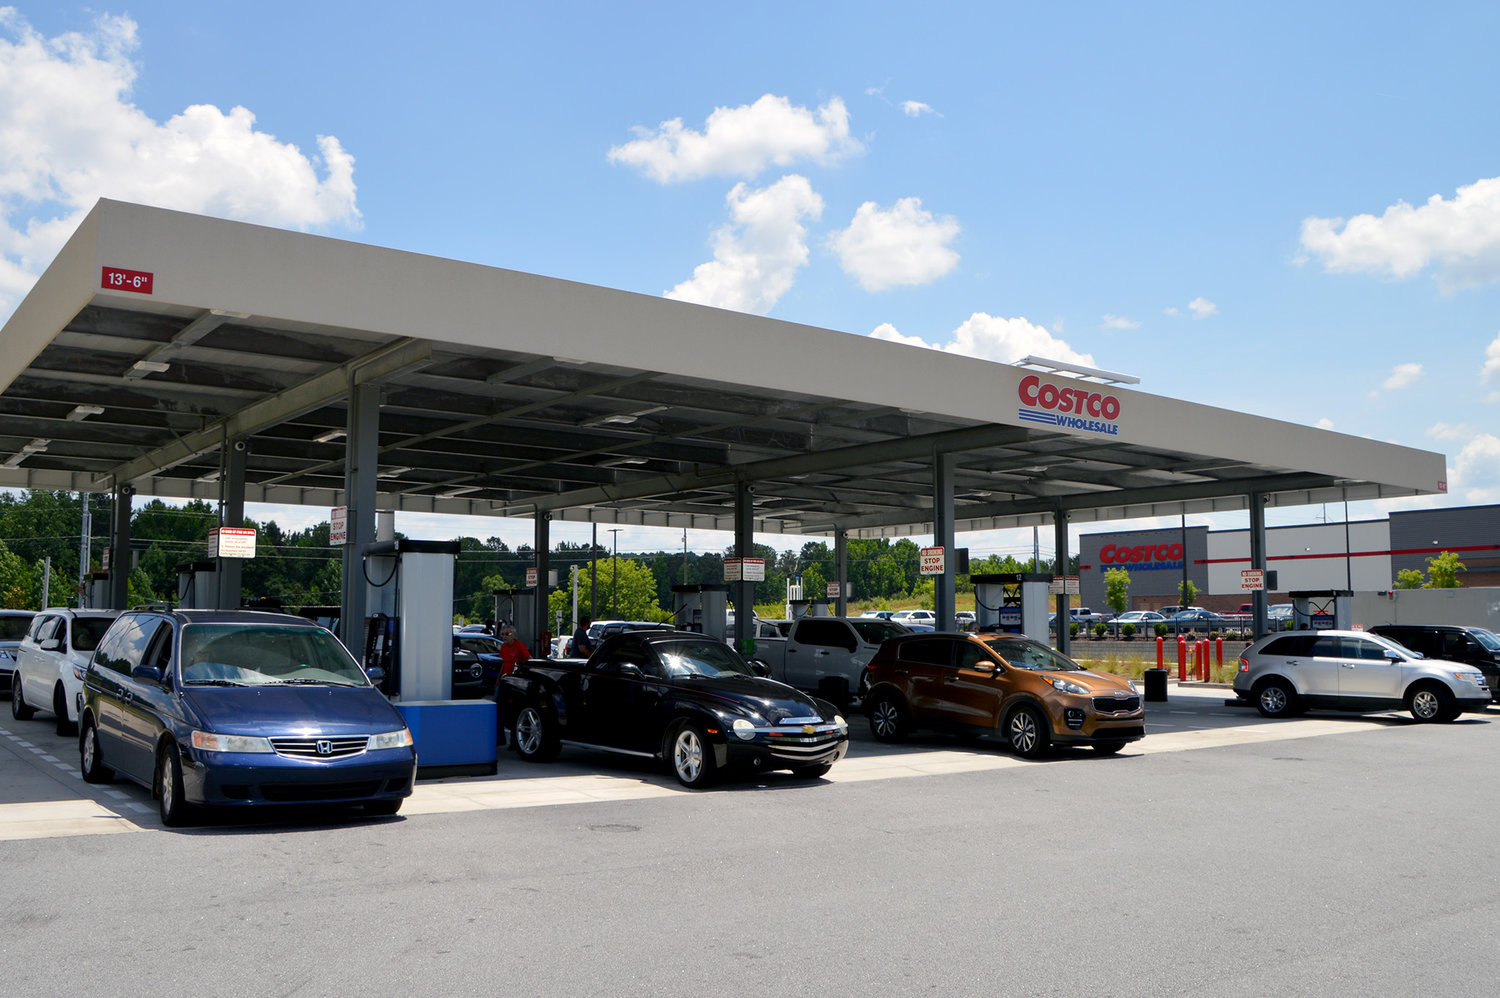 Motorists wait in long lines to get fuel at a Costco gas station in Dallas, Ga., June 12, 2022. (Index/Henry Durand)